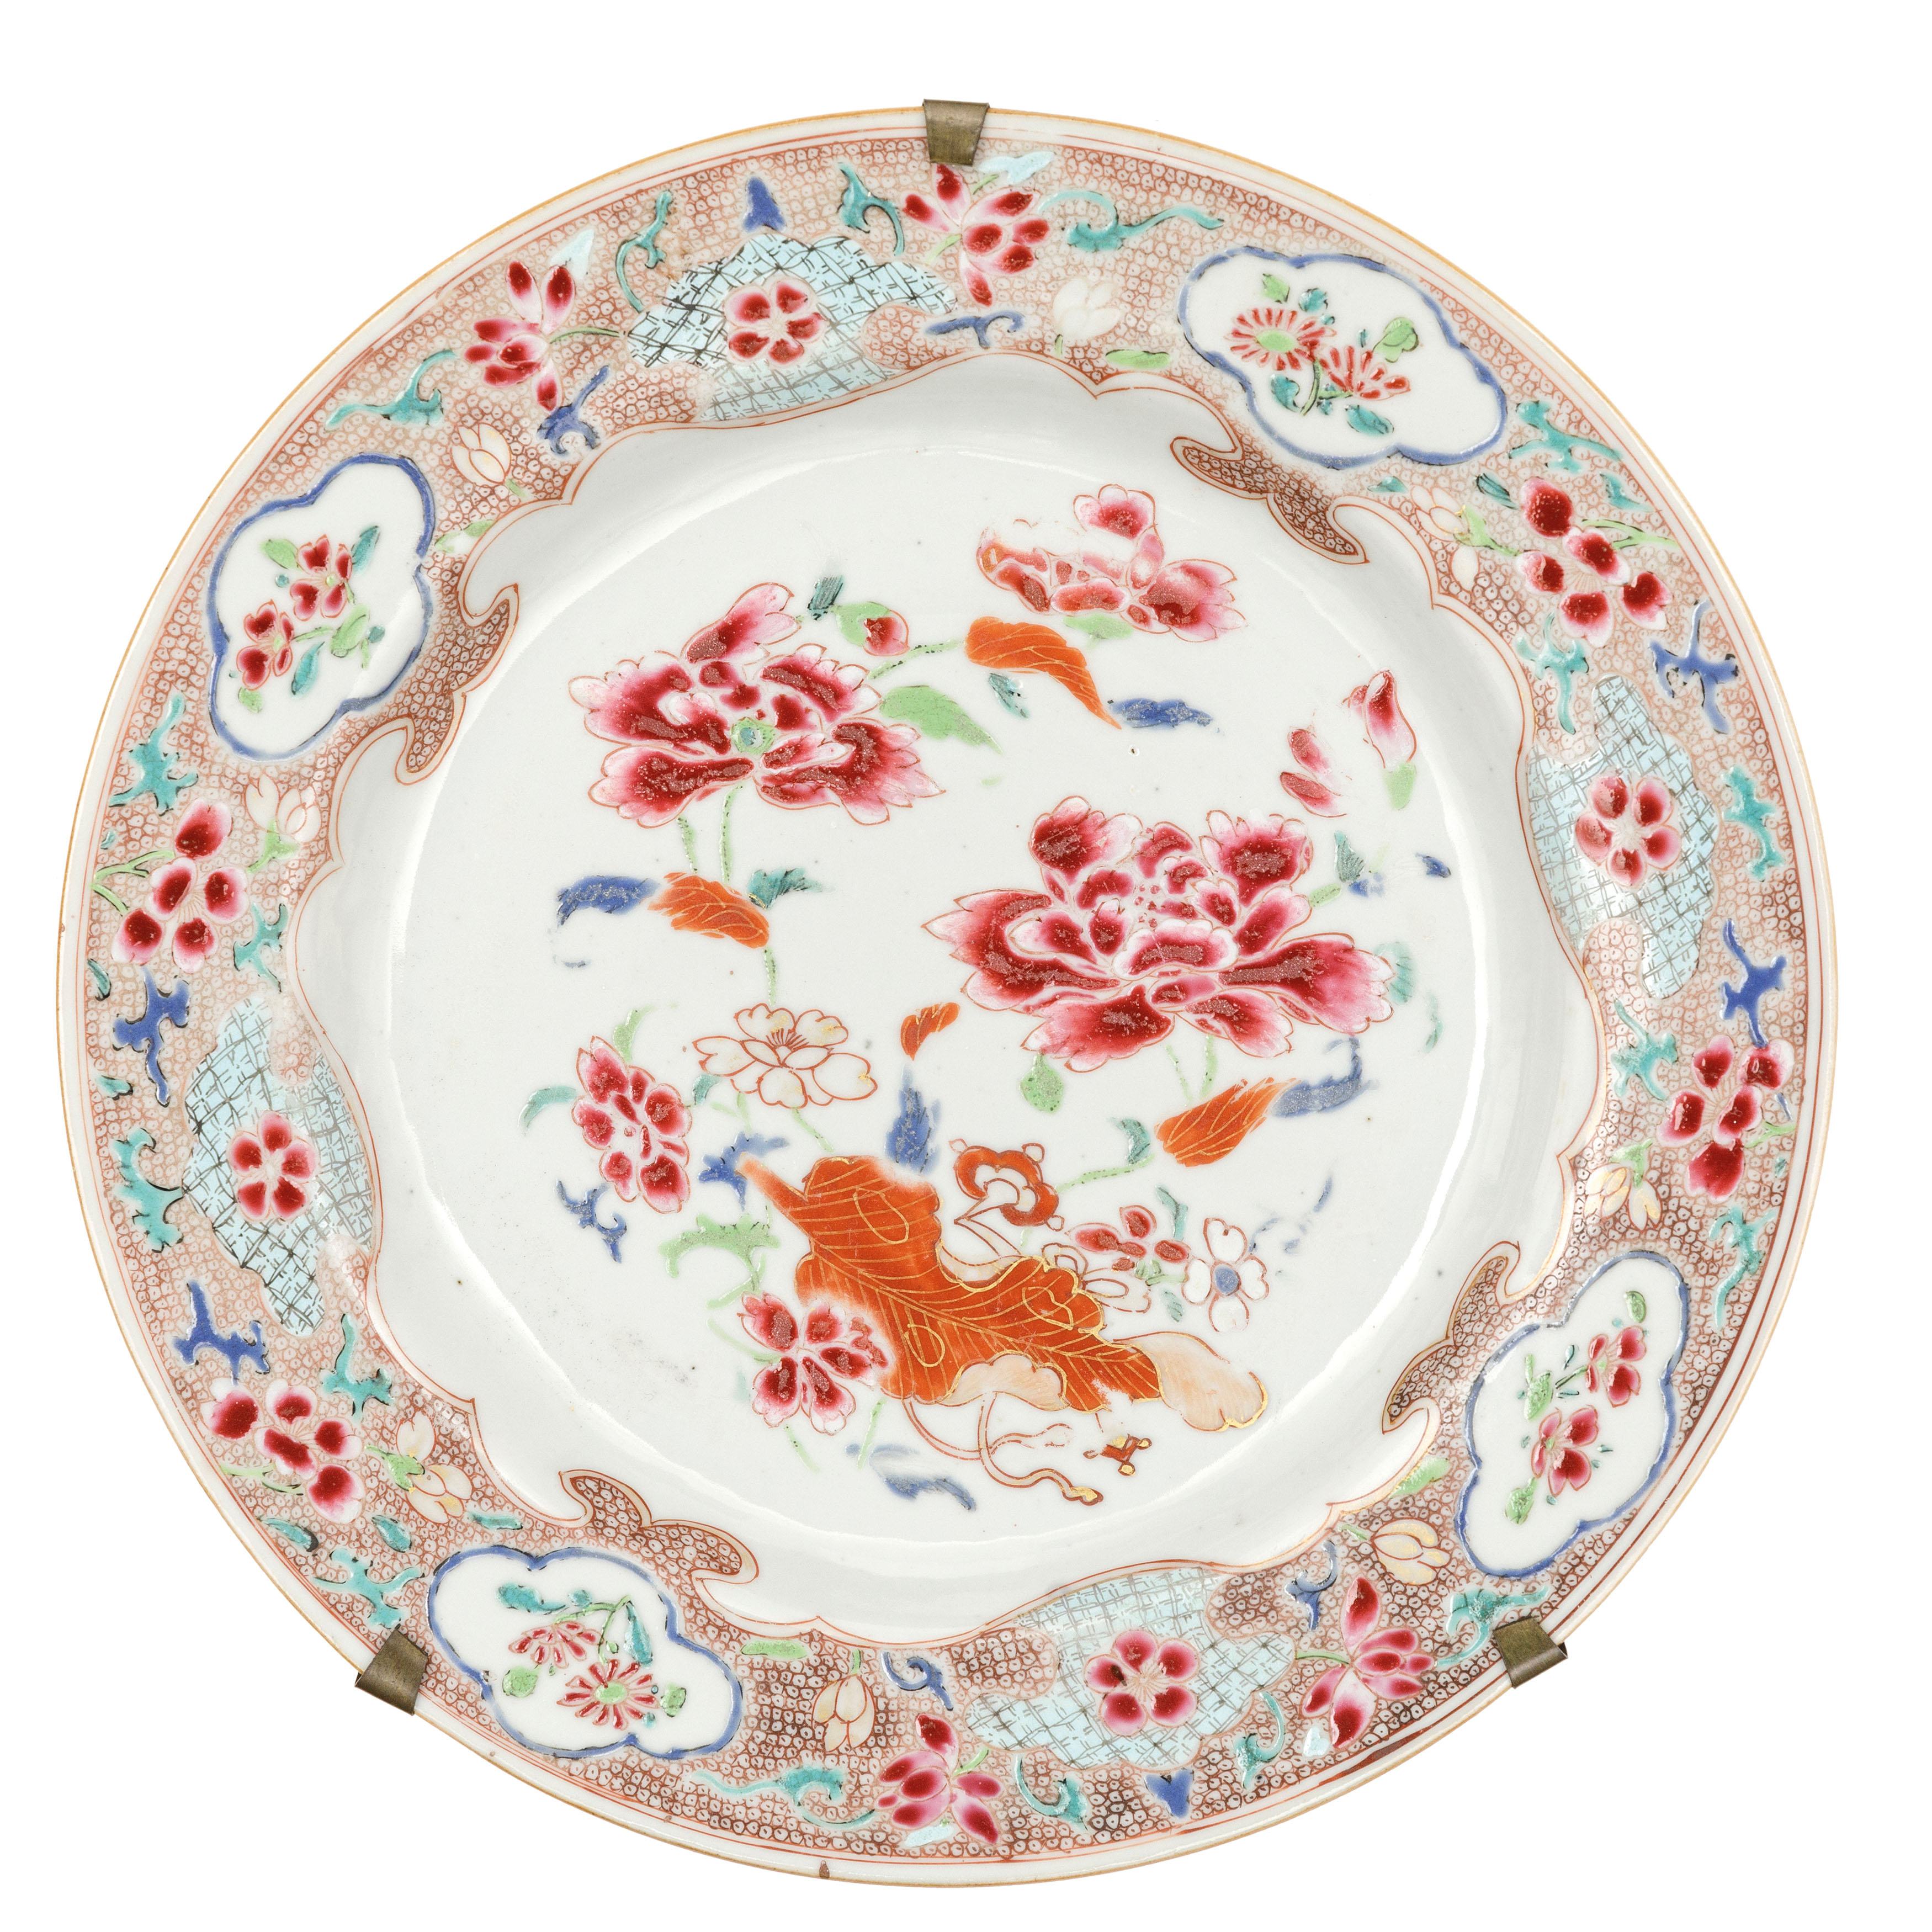 SIX DIFFERENT FAMILLE ROSE PORCELAIN DISHES, CHINA, MIDDLE 18TH CENTURY (6) - Image 5 of 6